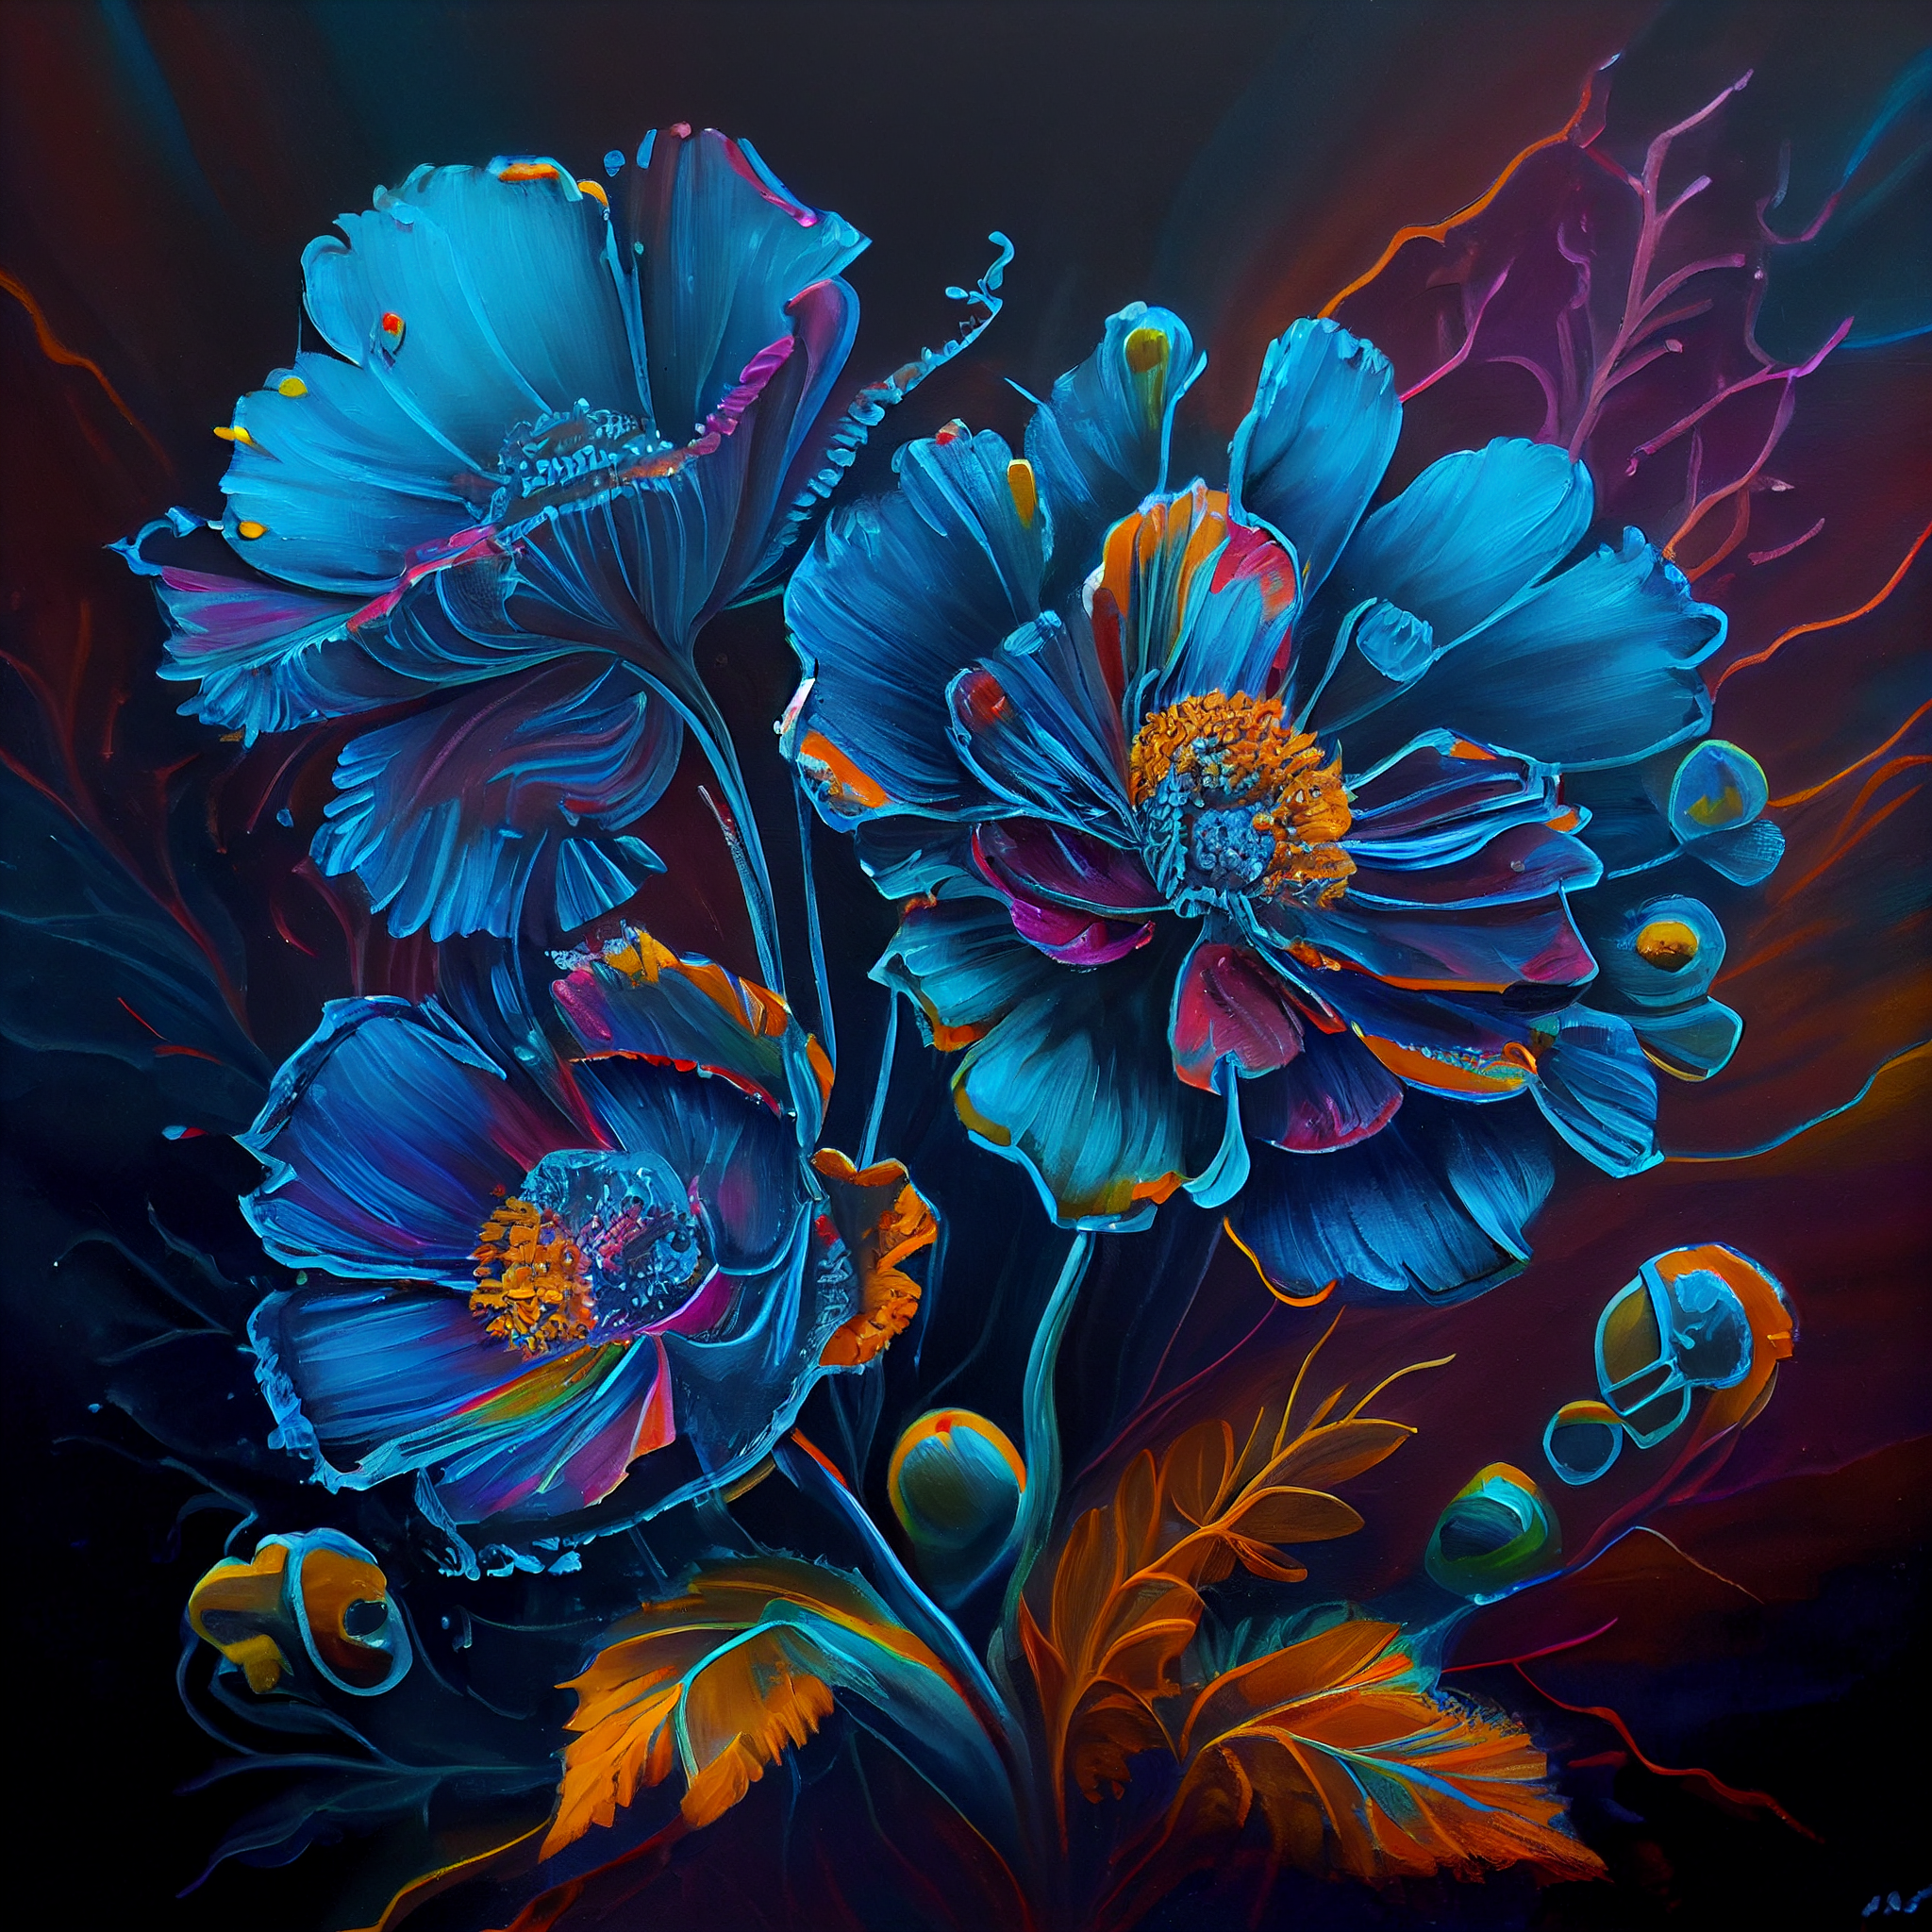 Turquoise Extraterrestrial Blossoms: Awe-Inspiring Ultra-Detailed Acrylic Painting Print with Rich Gradient Colors